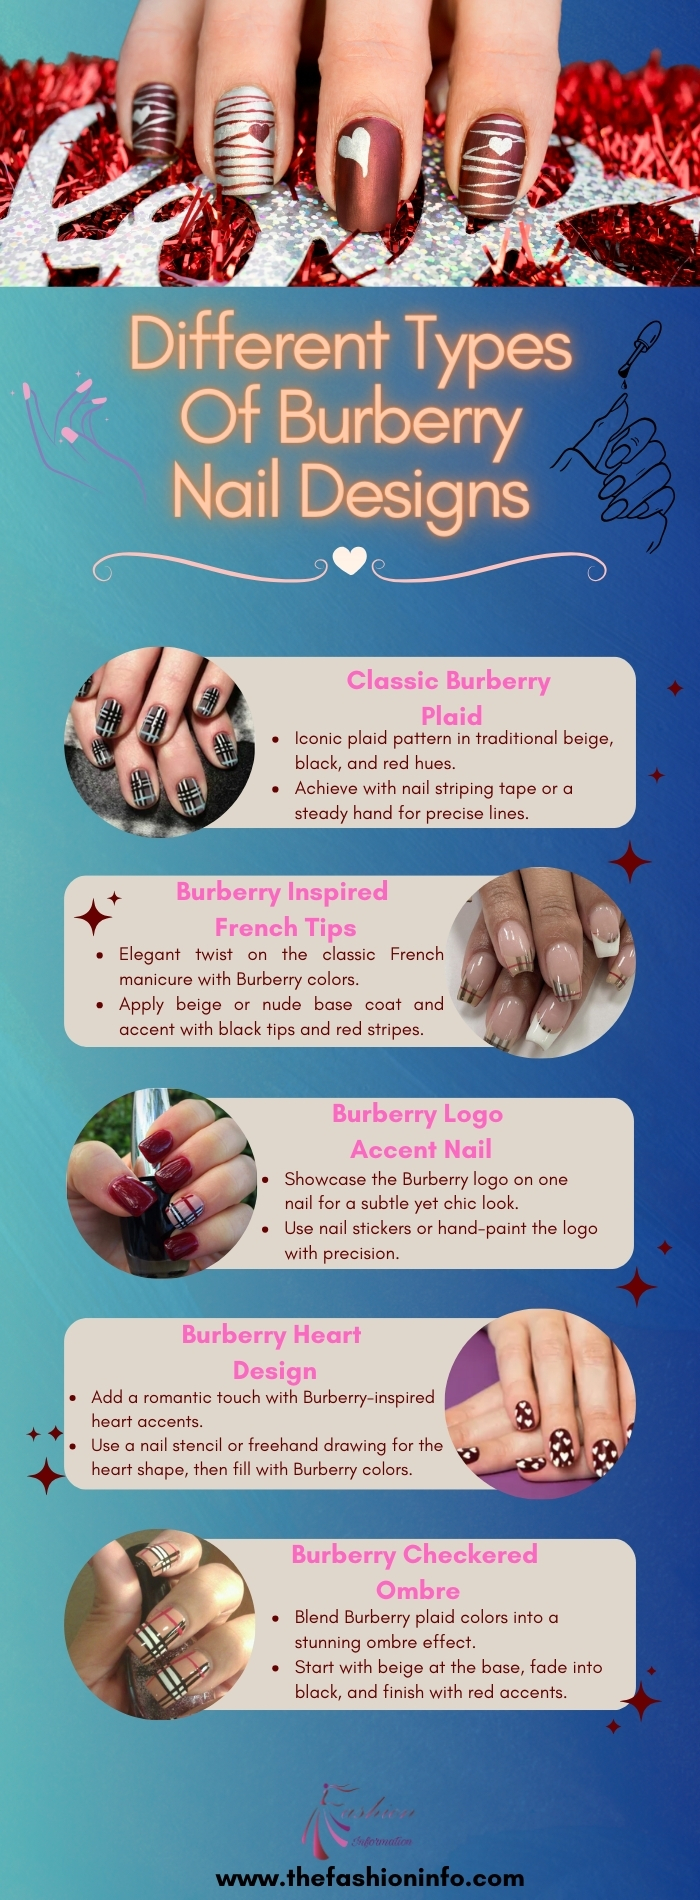 Different Types Of Burberry Nail Designs